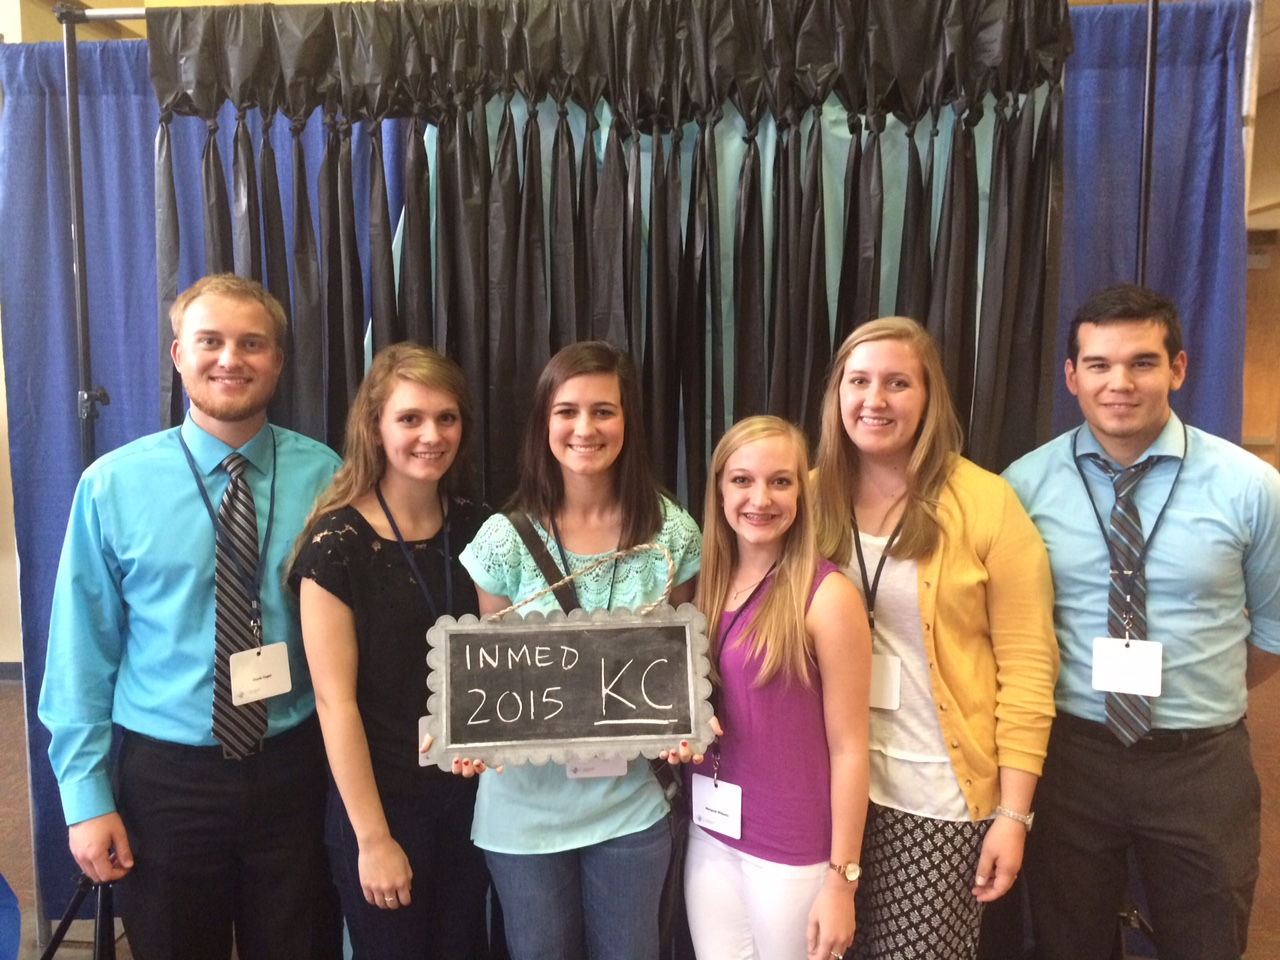 Participants in the internship program of the Consortium of Oklahoma Faith-Based Universities attended International Medicine’s Exploring Medical Missions Conference in Kansas City. Pictured left to right are Chase Yager, Kristen L’hommedieu, Alyssa Cardwell, Maggie Williams, Katyln Chambers and Jonas Harley.